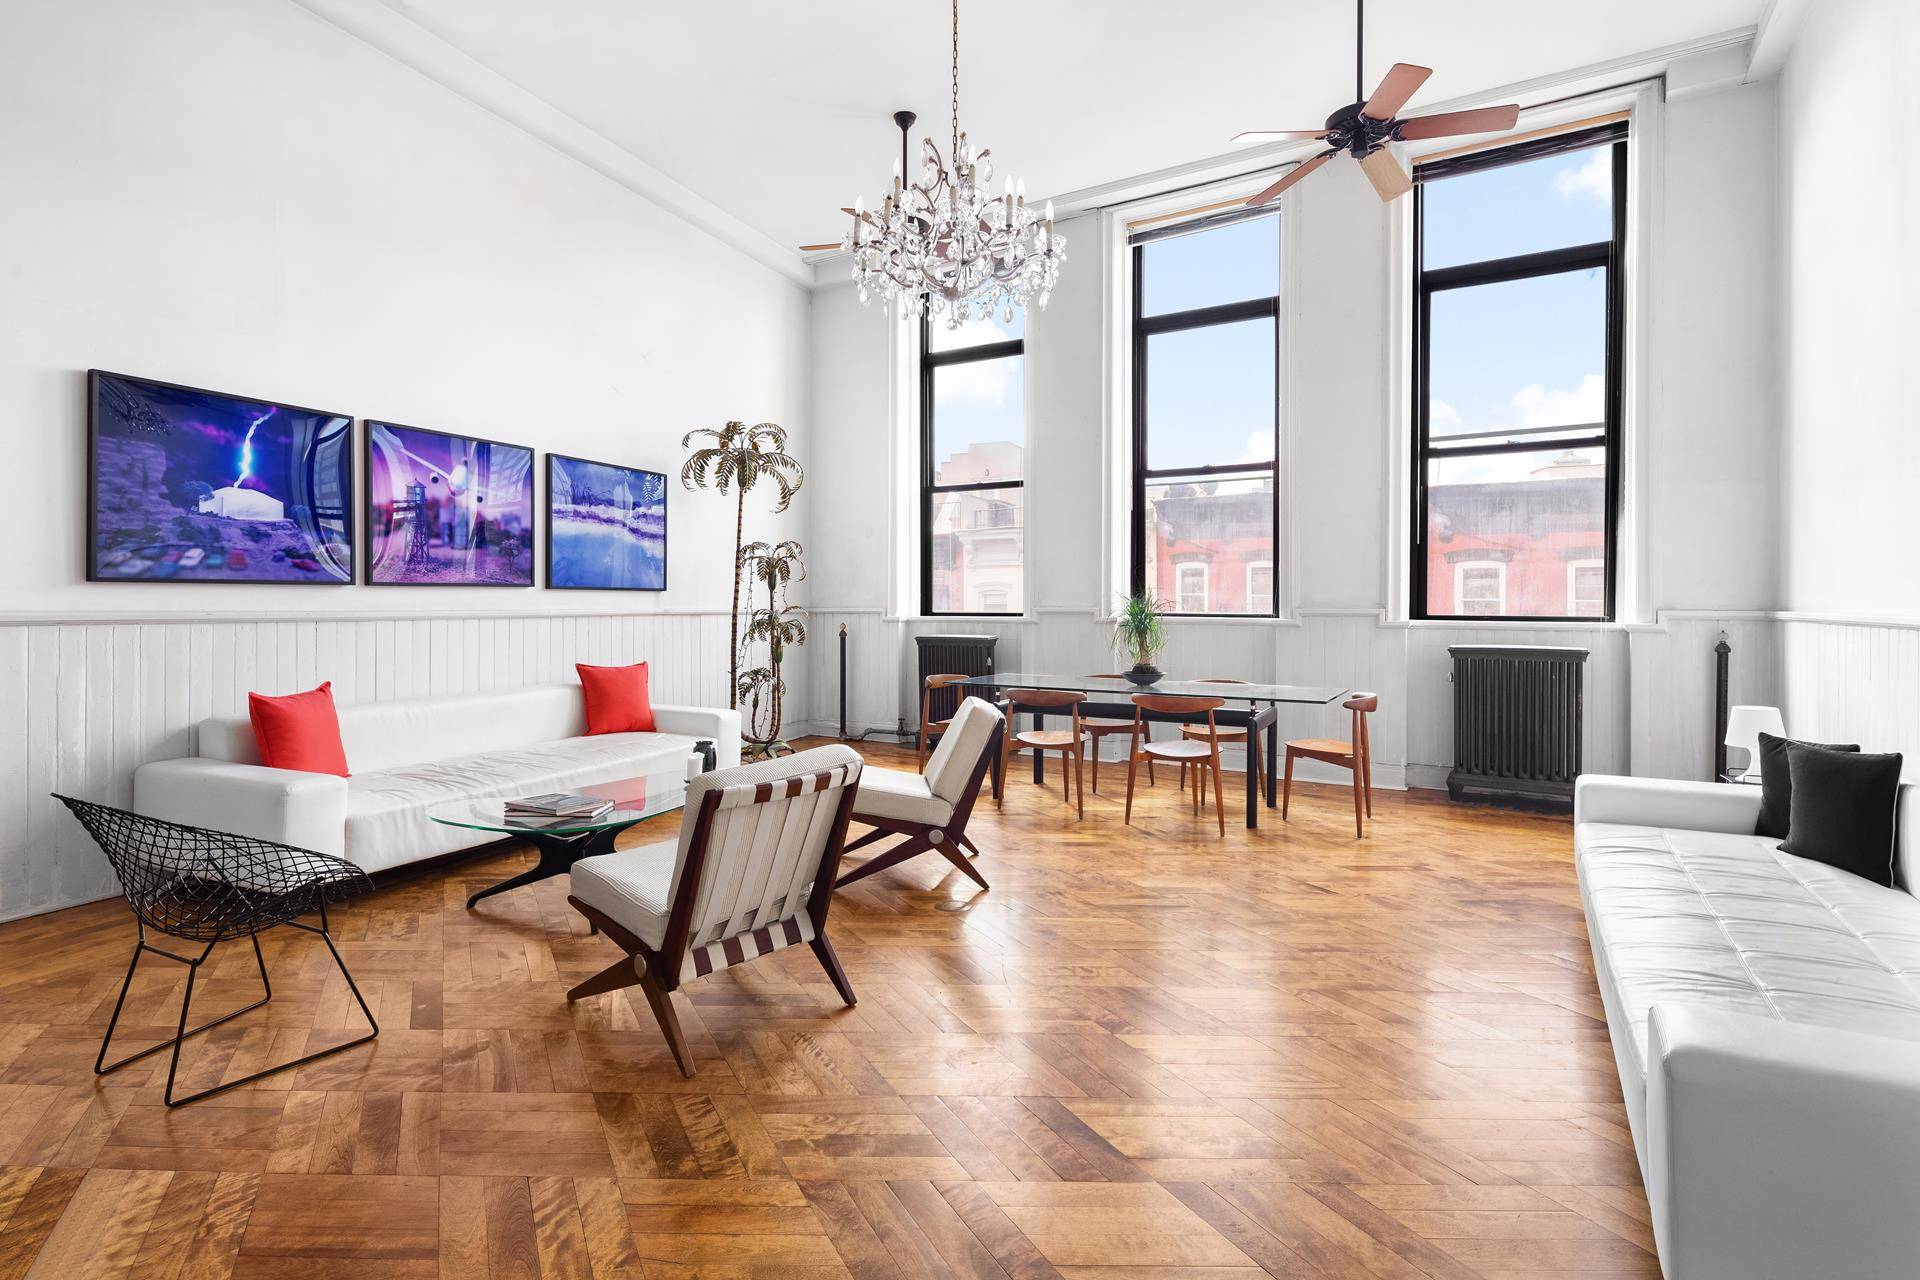 A true artist's loft in East Village's most preeminent creativity infused co op, duplex 4B is an exquisite expression of traditional yet modernized loft living.